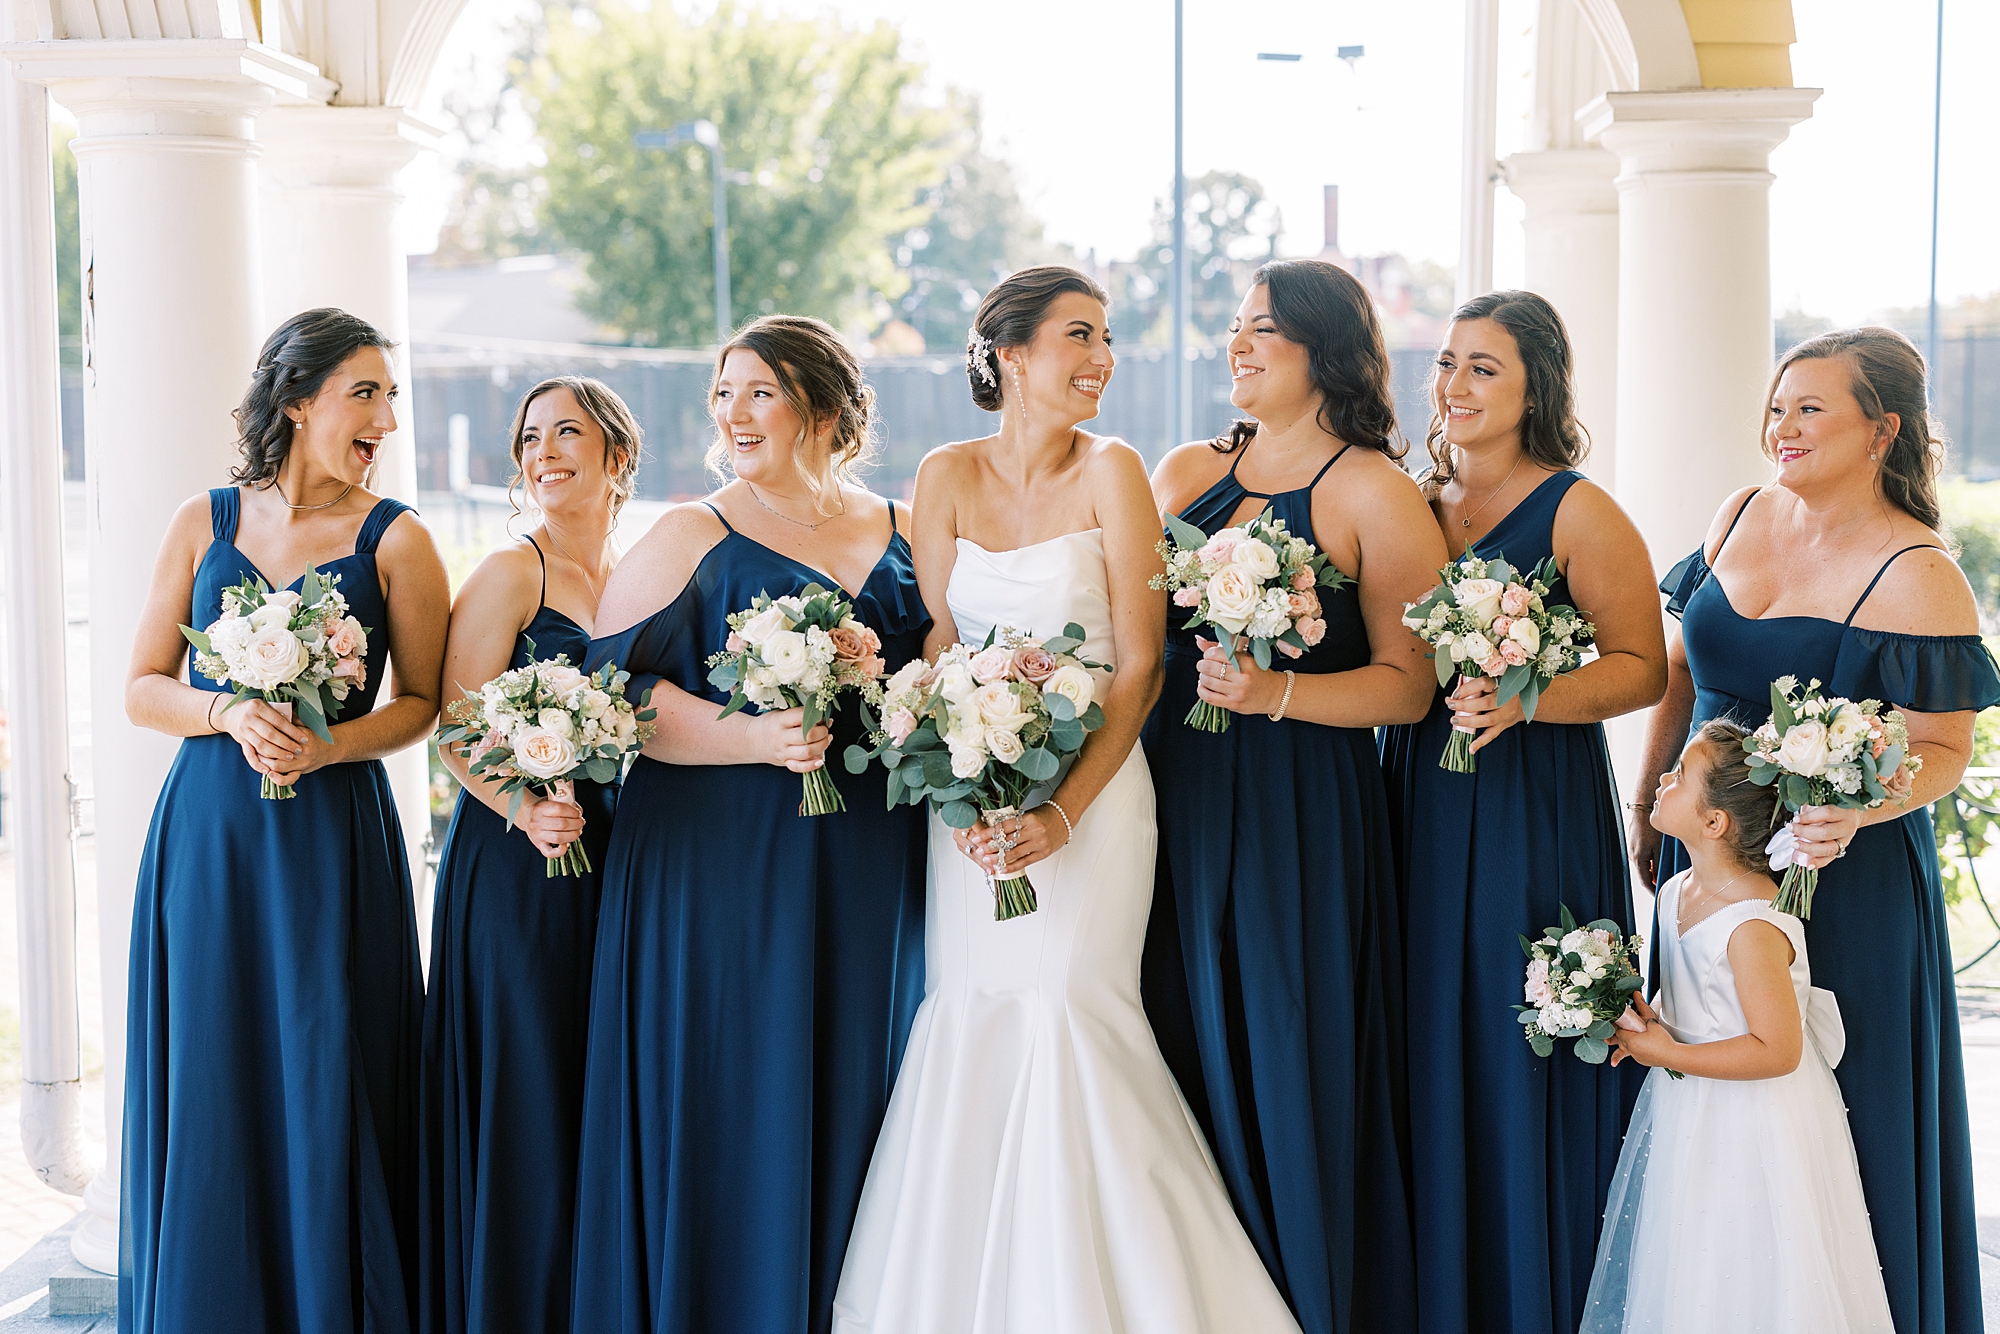 bride smiles with bridesmaids in navy gowns holding bouquet of pink and white flowers 